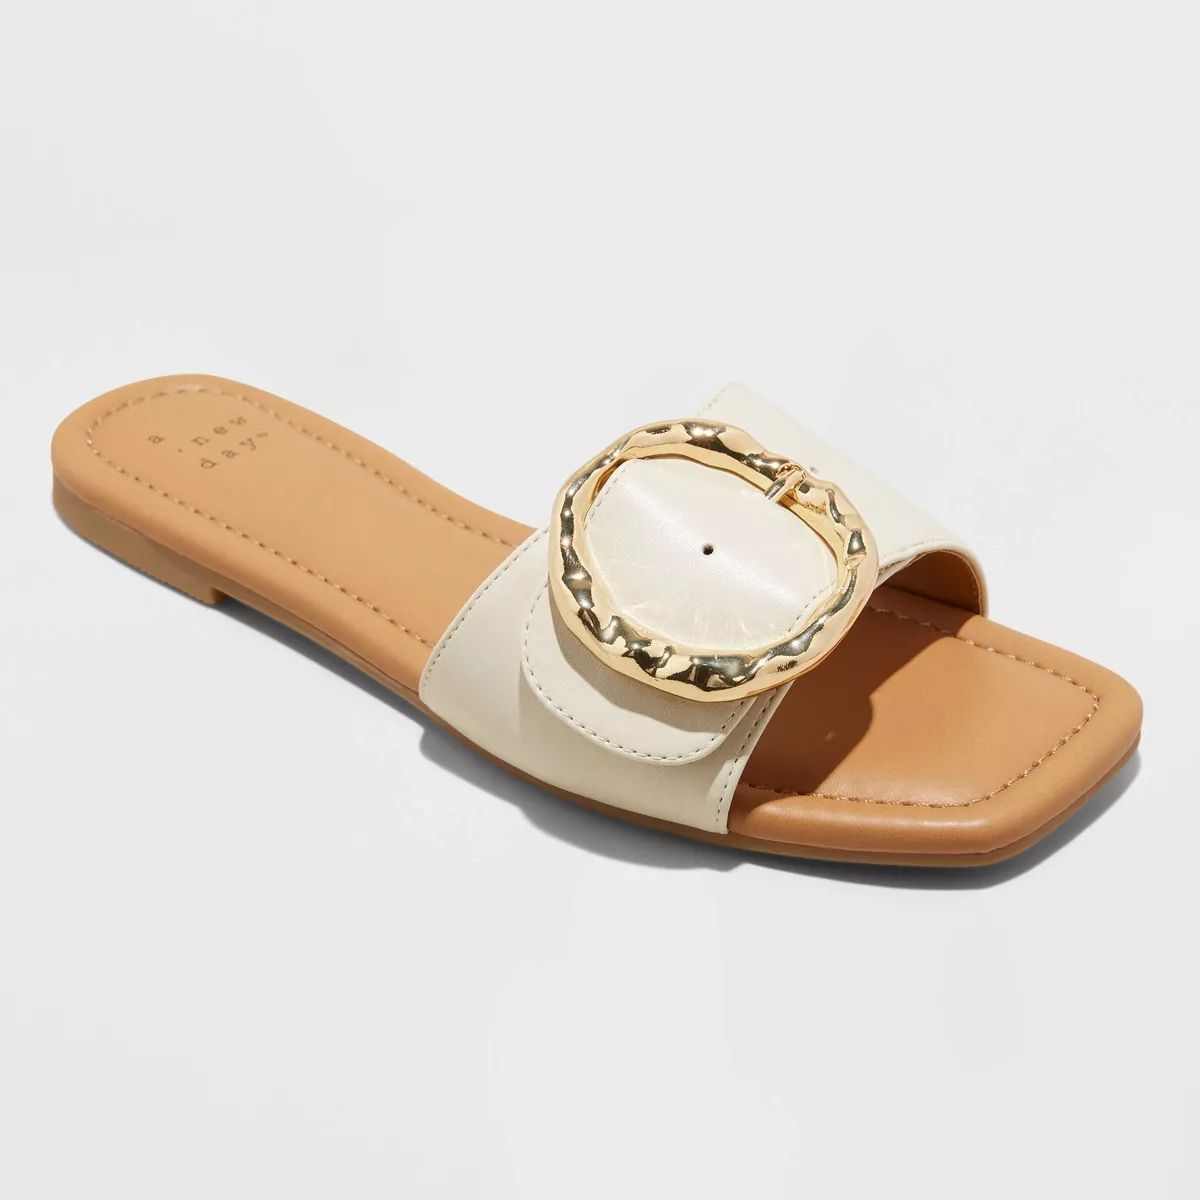 Women's Bennie Buckle Slide Sandals with Memory Foam Insole - A New Day™ Cream | Target